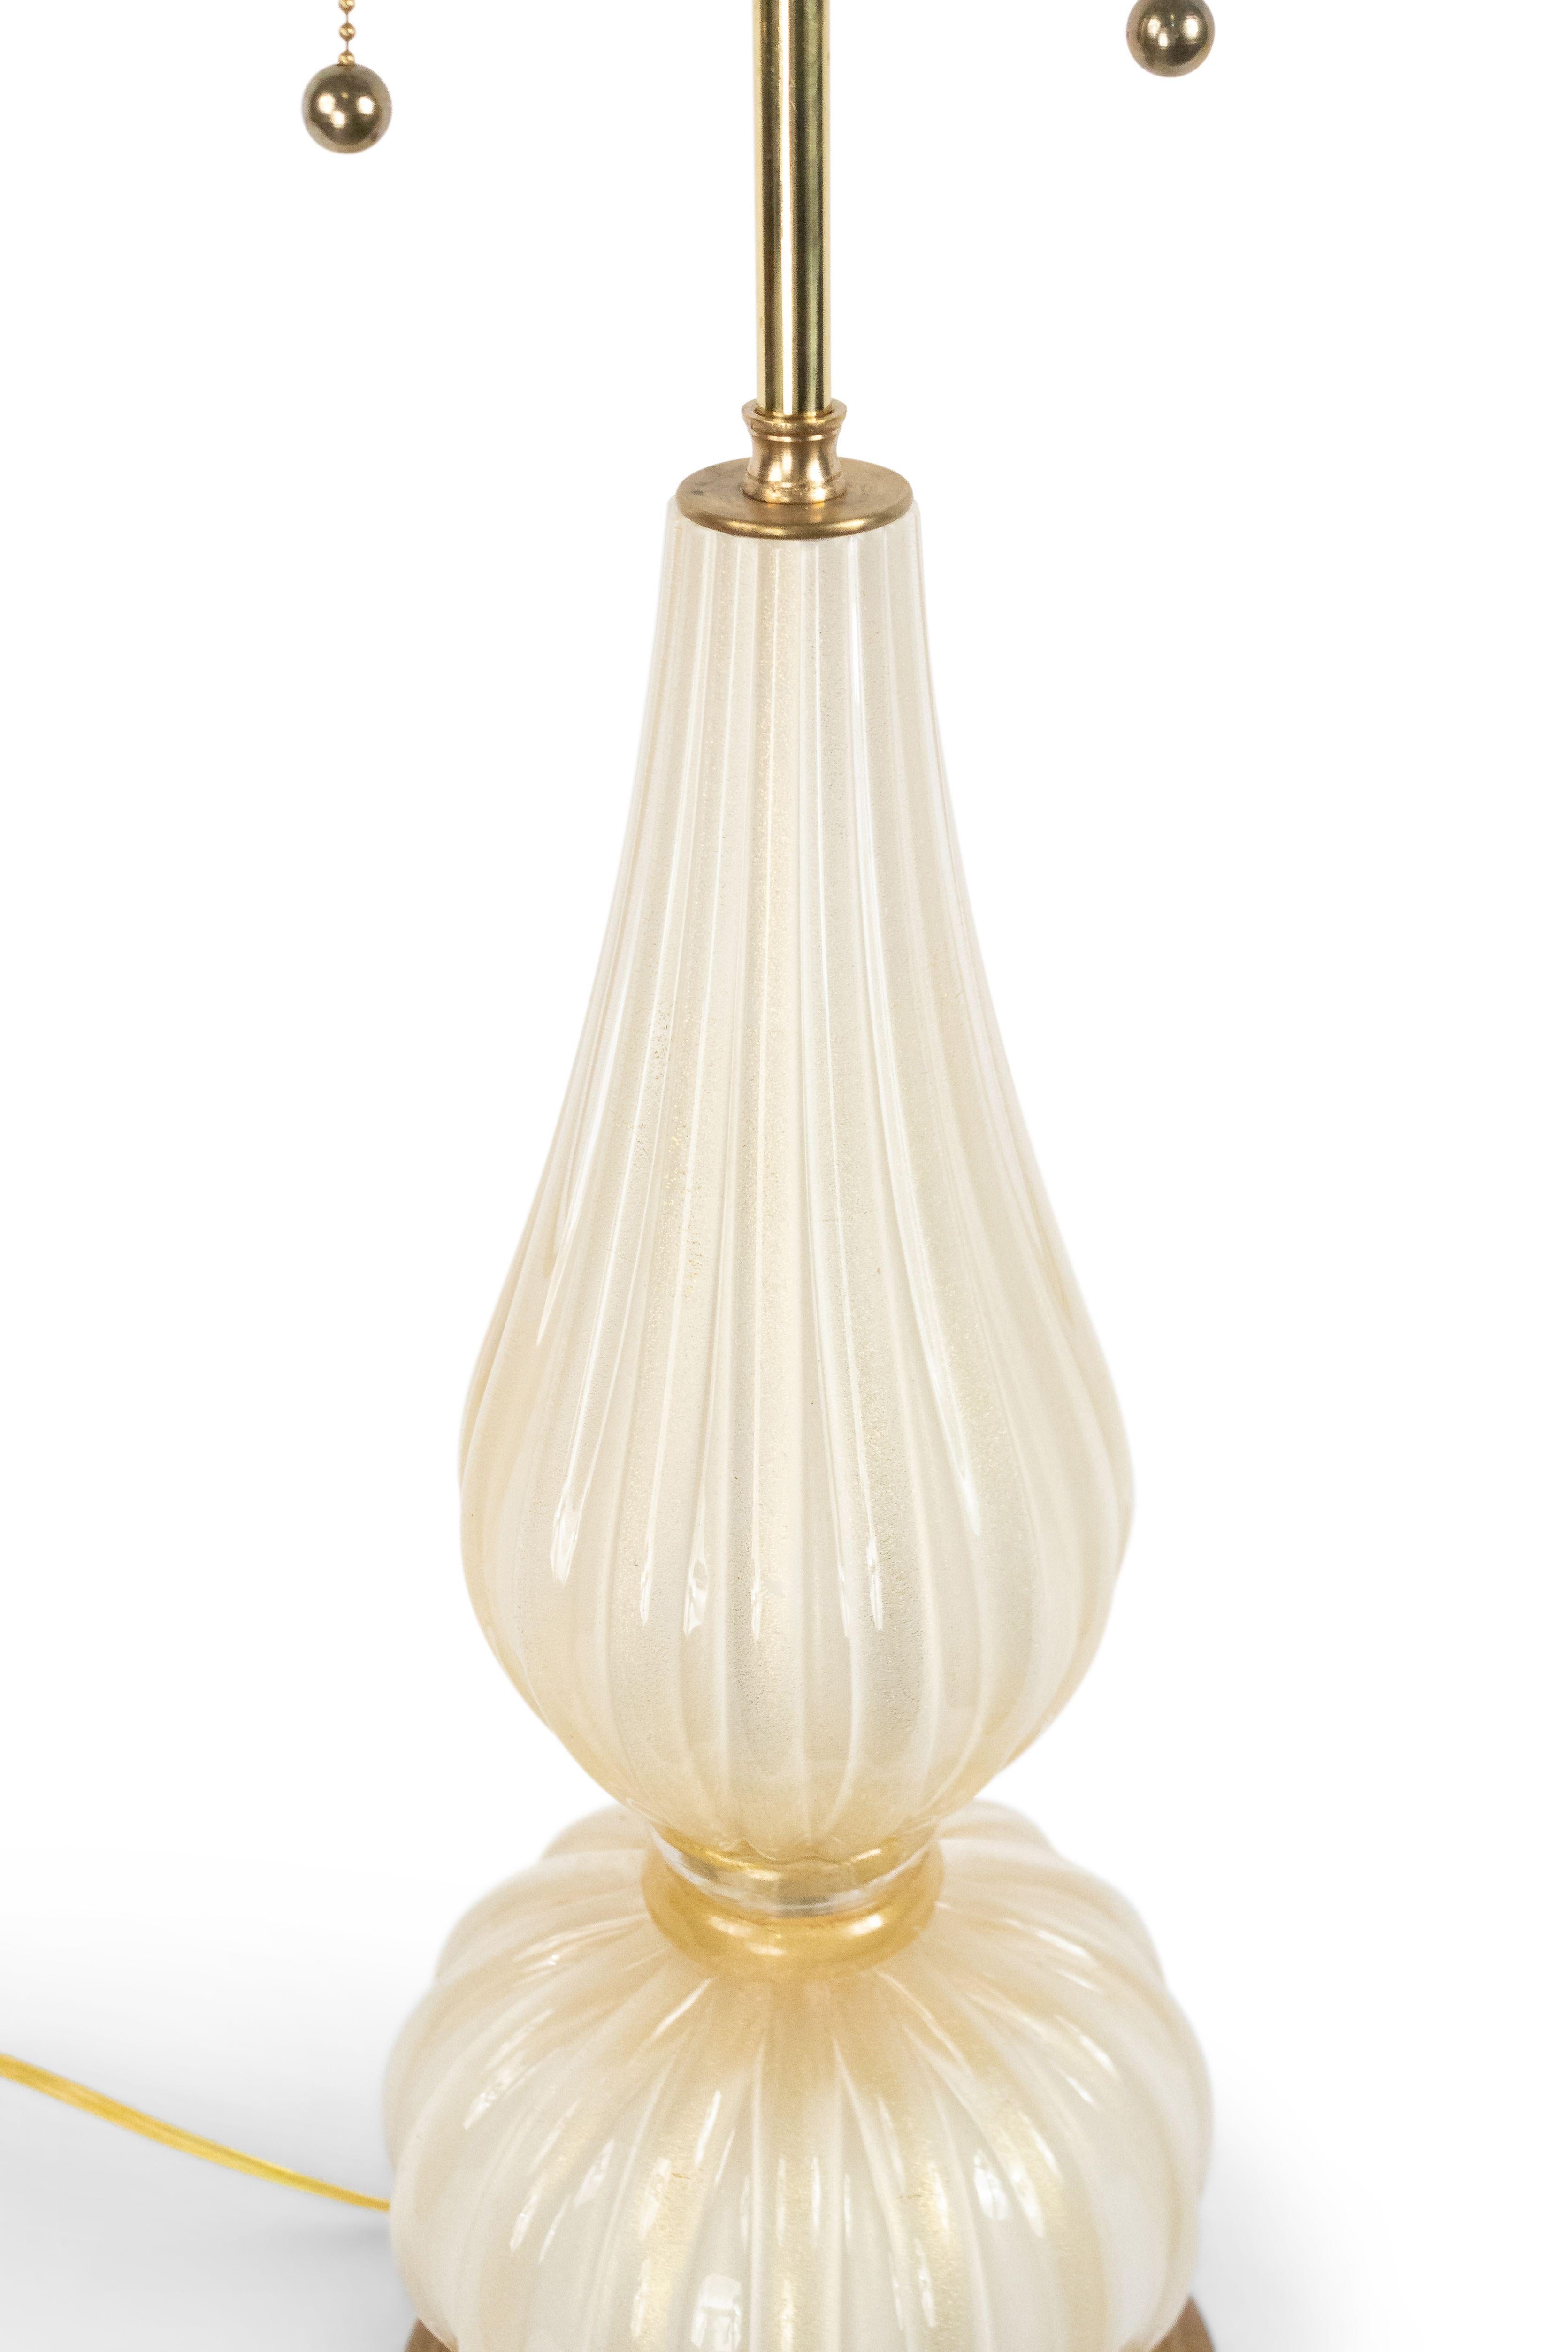 Italian midcentury-style white glass and gold dusted table lamp with a large fluted ball base over a shaped fluted section and resting on a modern round wood base.